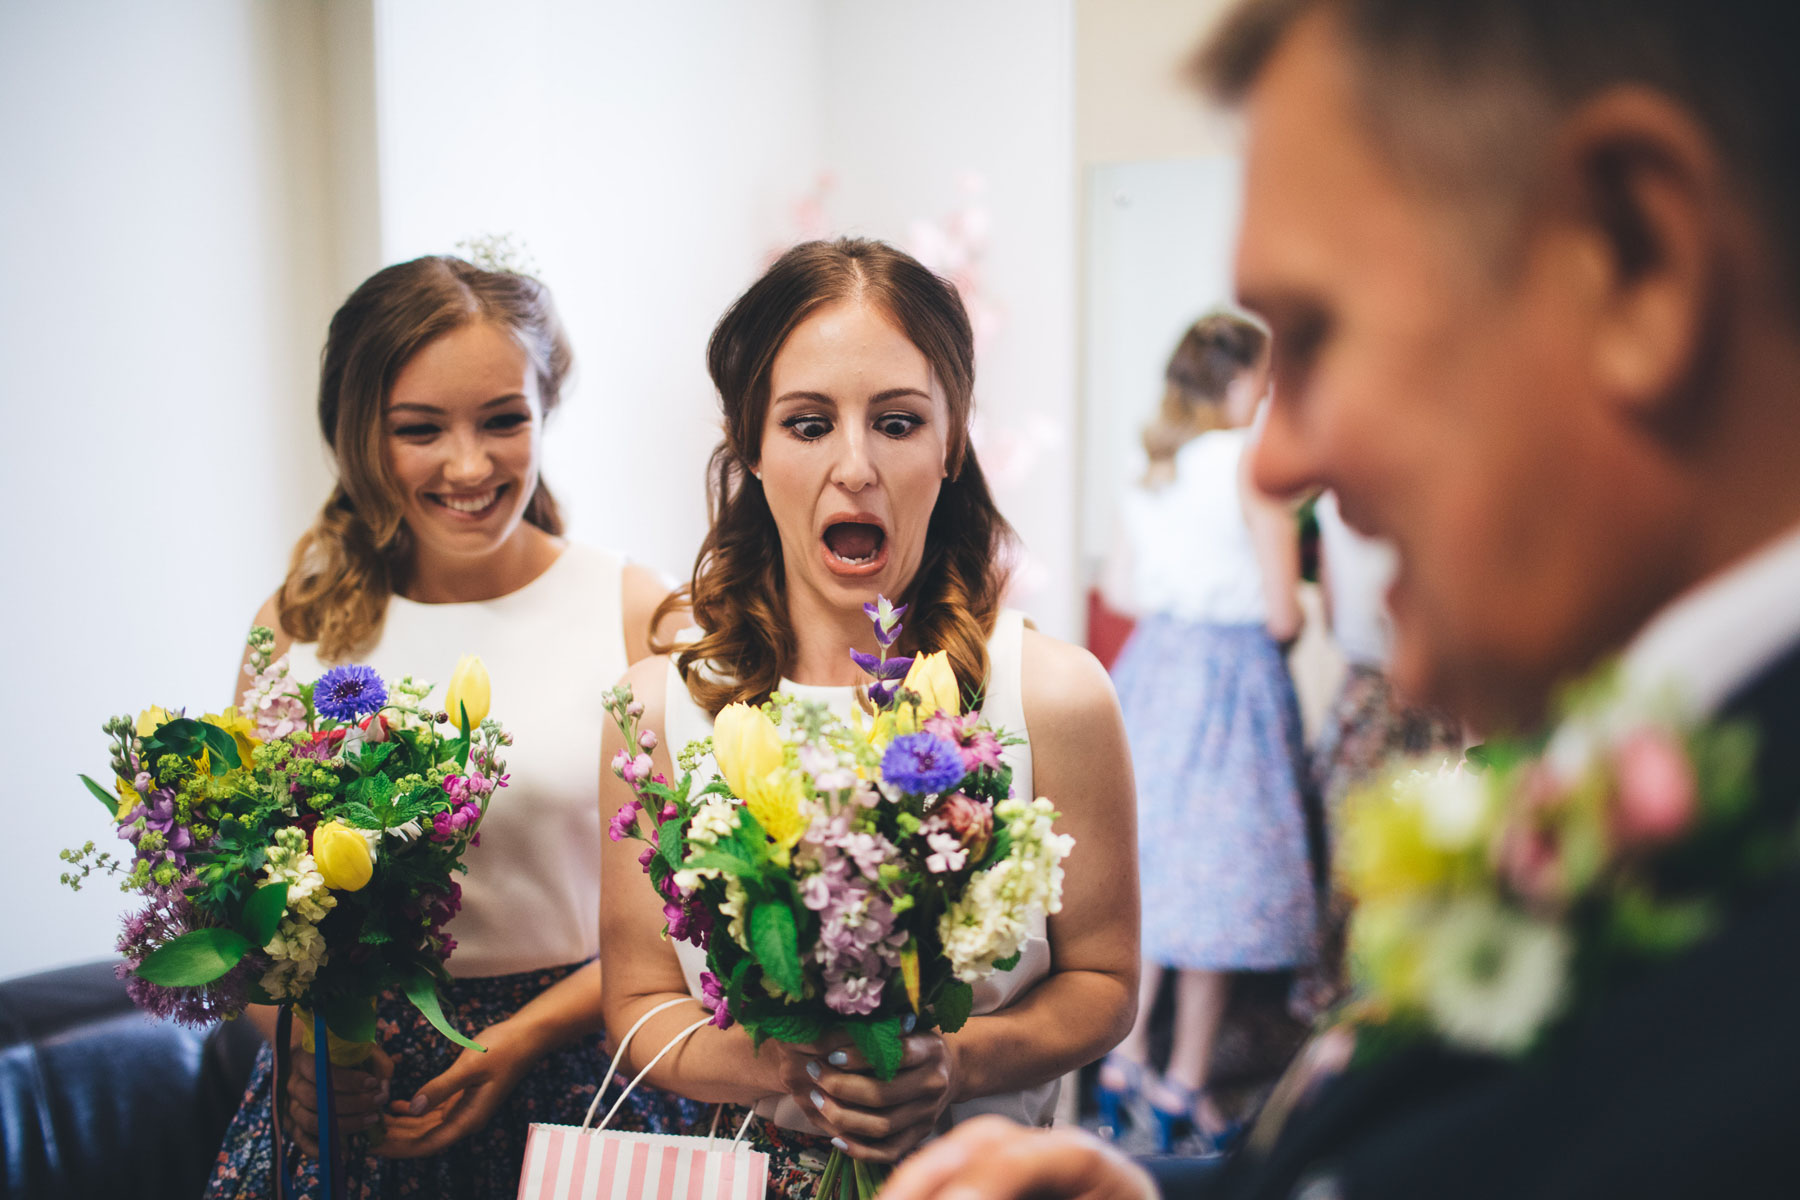 bridemaids gives funny expression at bouquet